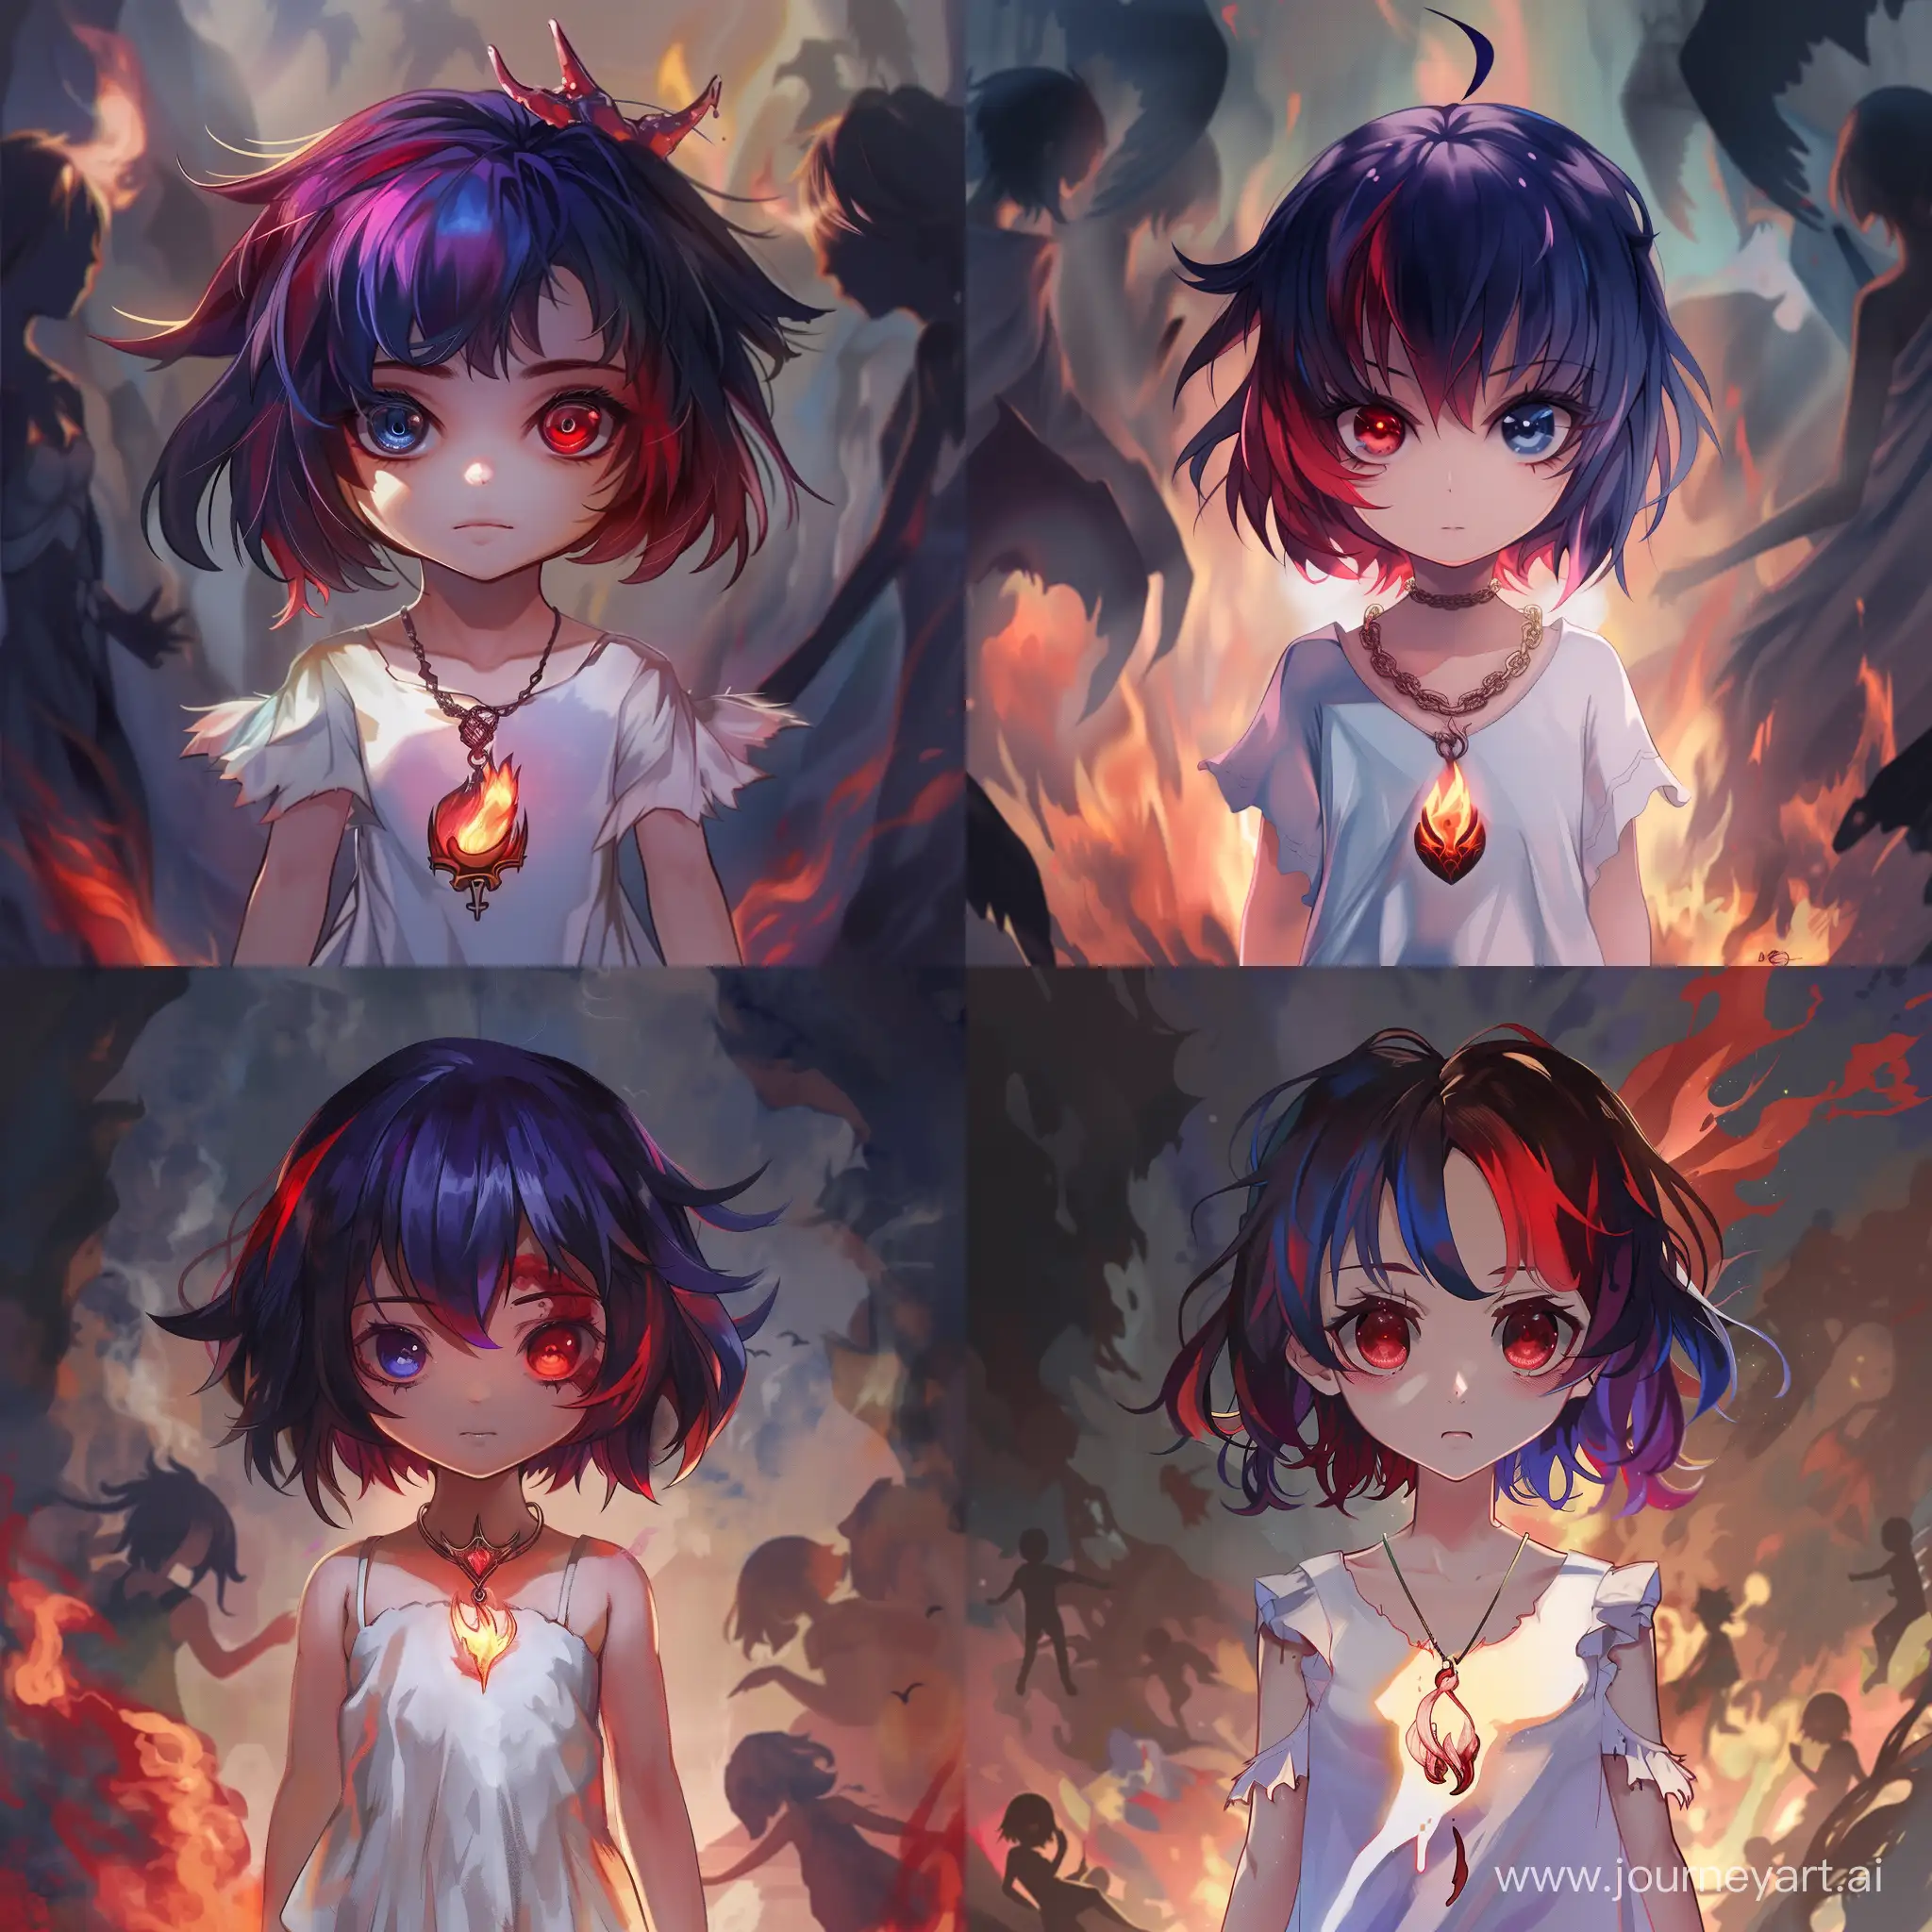 Imagine a powerful demon under Satan, with vast powers, in the body of an innocent little girl. She has dark purple hair with red highlights, mismatched eyes (one red, one blue), wearing a simple white dress and a flame-shaped pendant. Background: surreal, shadowy figures and ethereal flames. Style: 2D anime, blend of innocence and malevolence